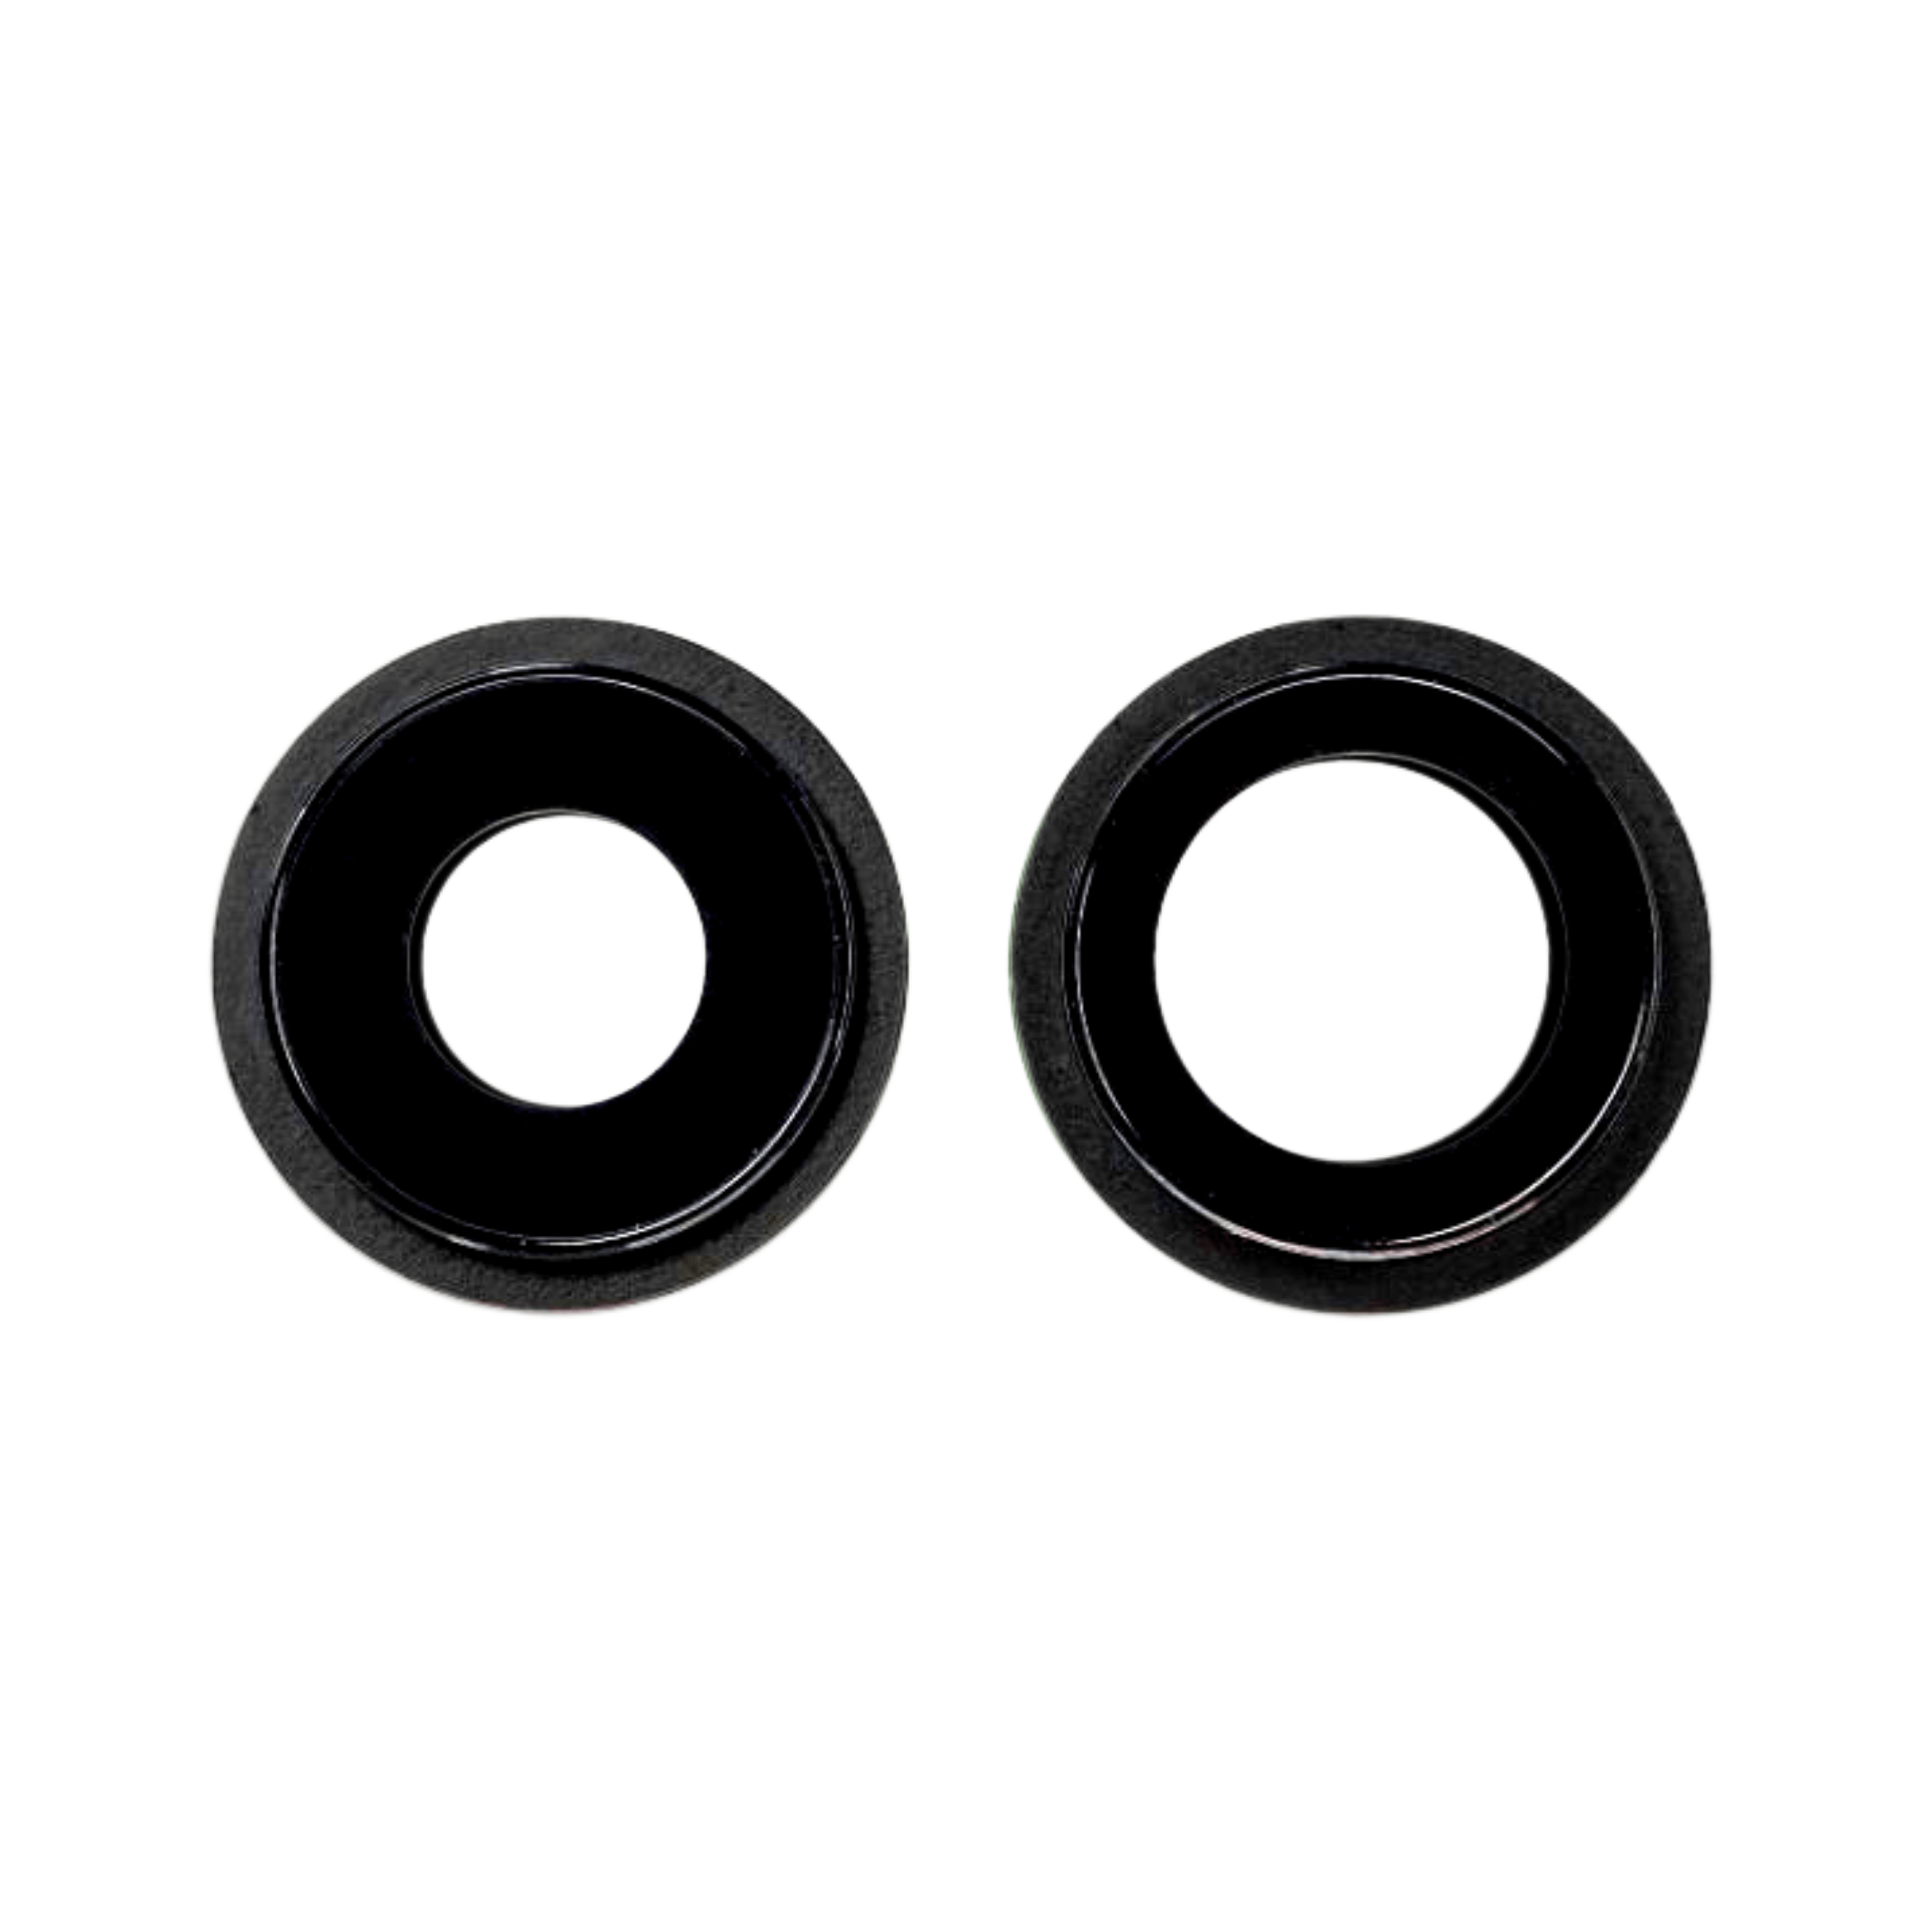 Rear Camera Lens with Bracket for iPhone 11 Black